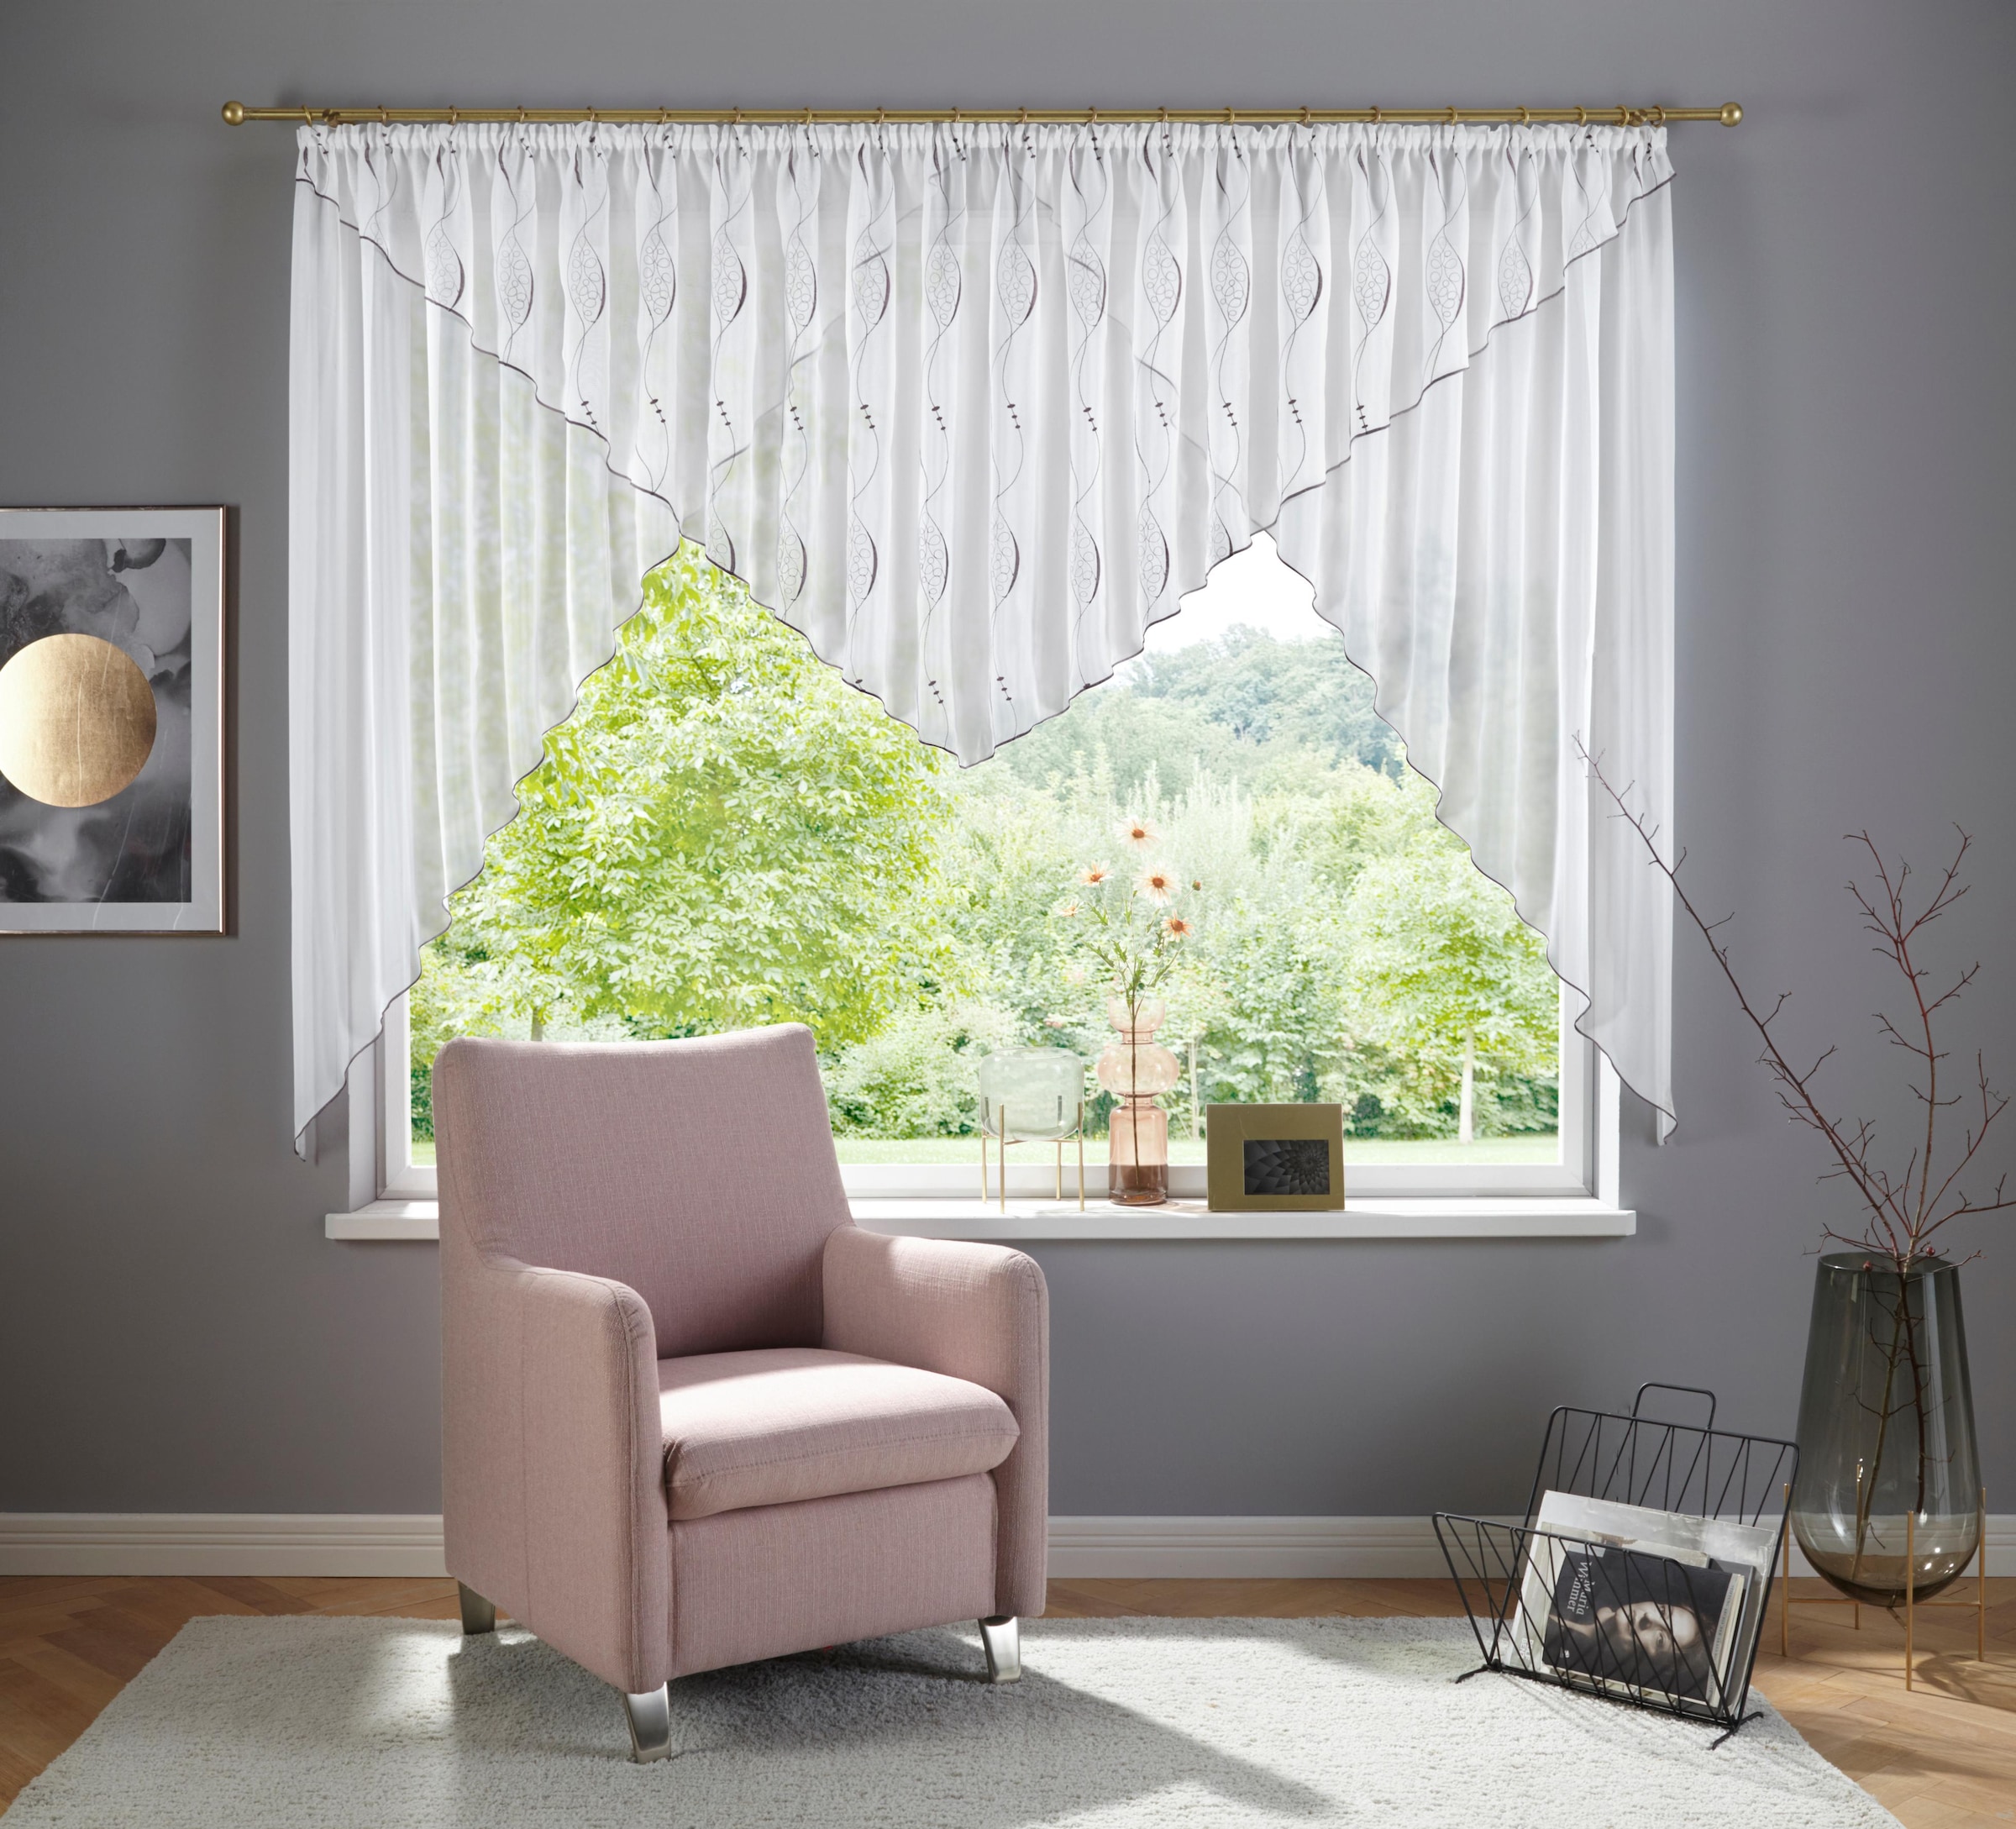 »Bea«, my St.), Transparent, Voile, (1 Kuvertstore home Polyester